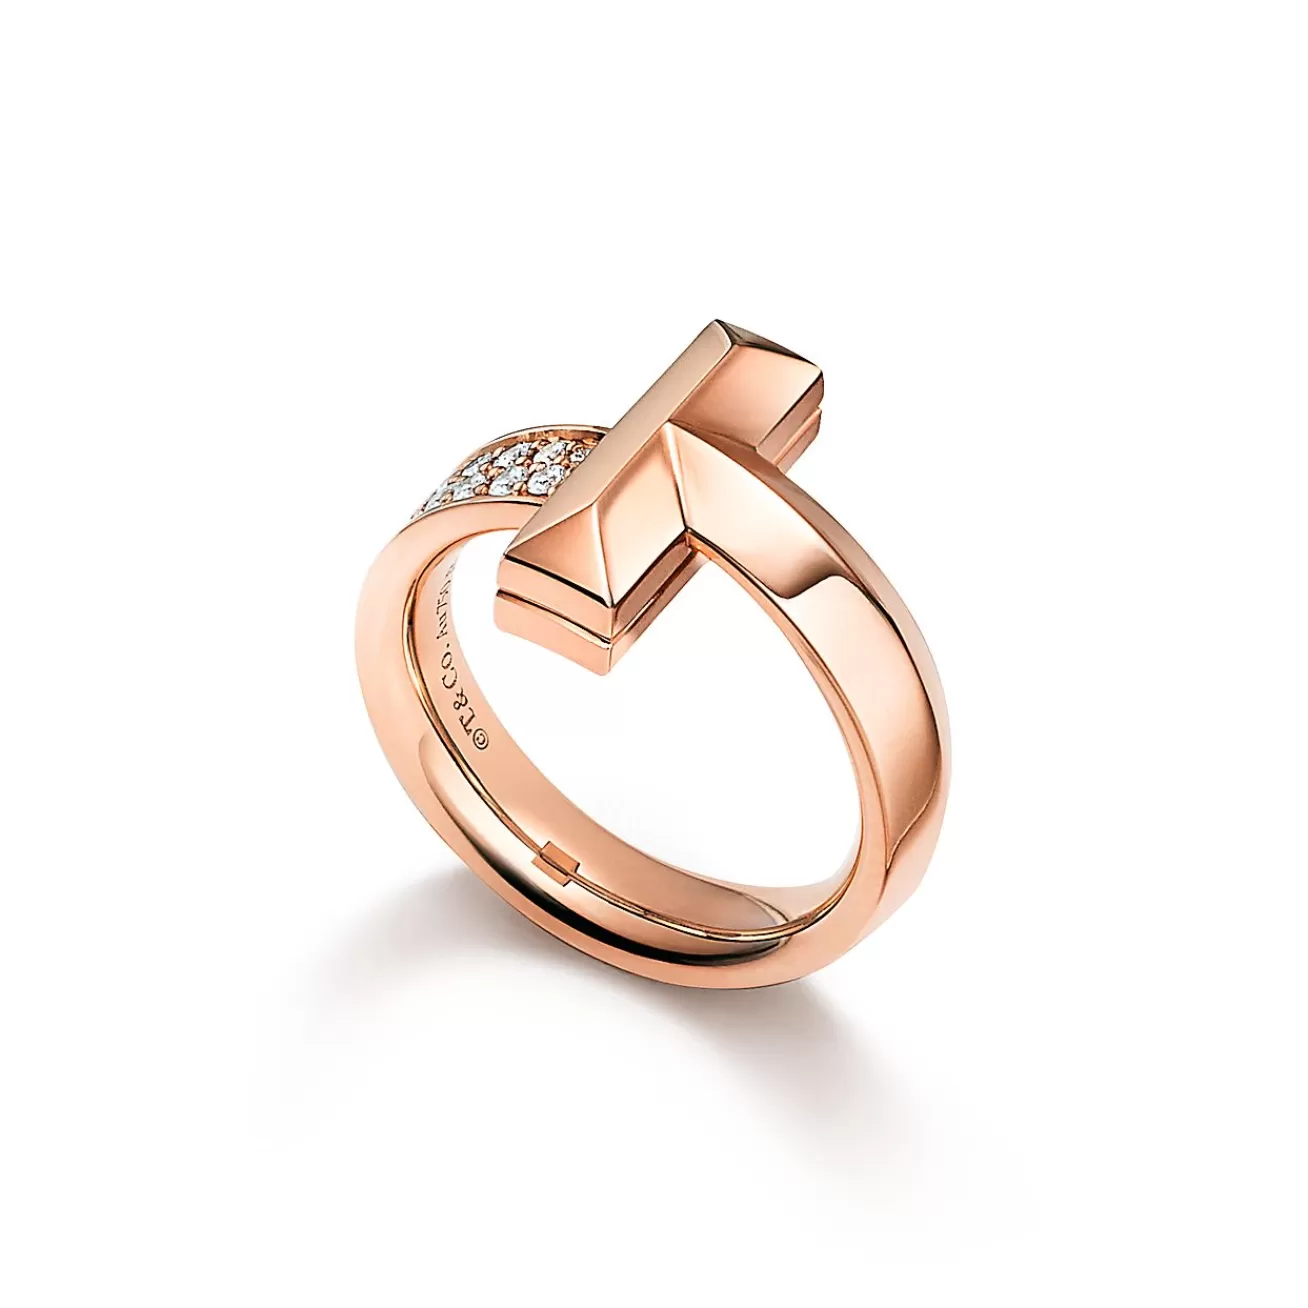 Tiffany & Co. Tiffany T T1 Ring in Rose Gold with Diamonds, 4.5 mm Wide | ^ Rings | Rose Gold Jewelry